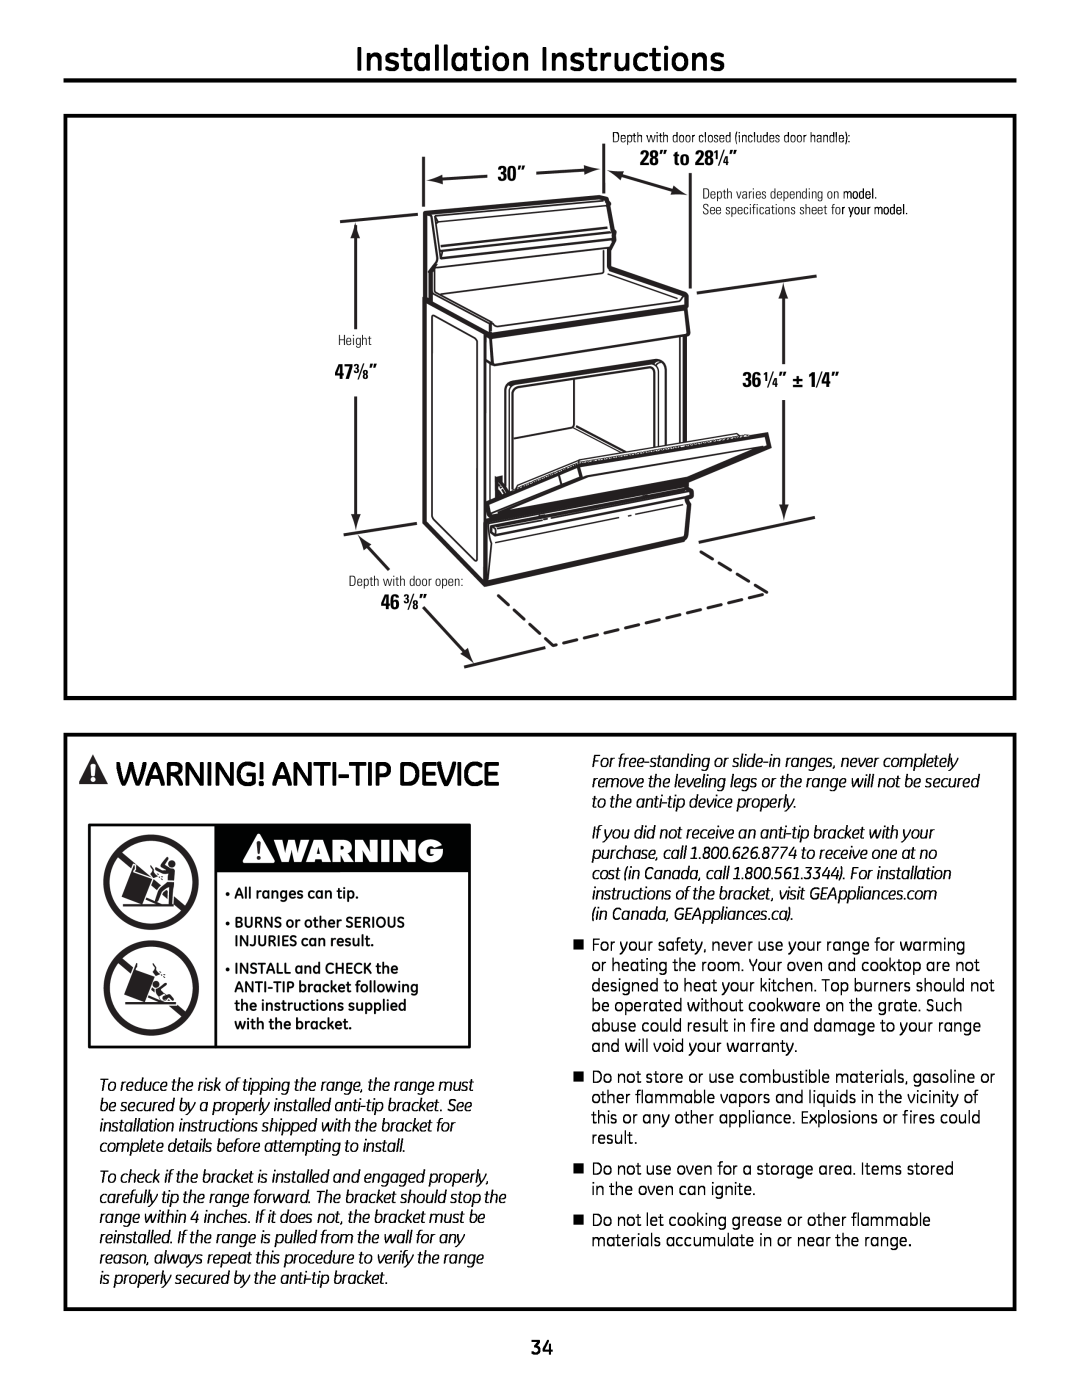 GE JGB428SERSS Installation Instructions, wARnInG! AnTI-TIPDEVICE, 473⁄8”, 46 3⁄8”, 28” to 281⁄4” 30”, 361⁄4” ± 1⁄4” 